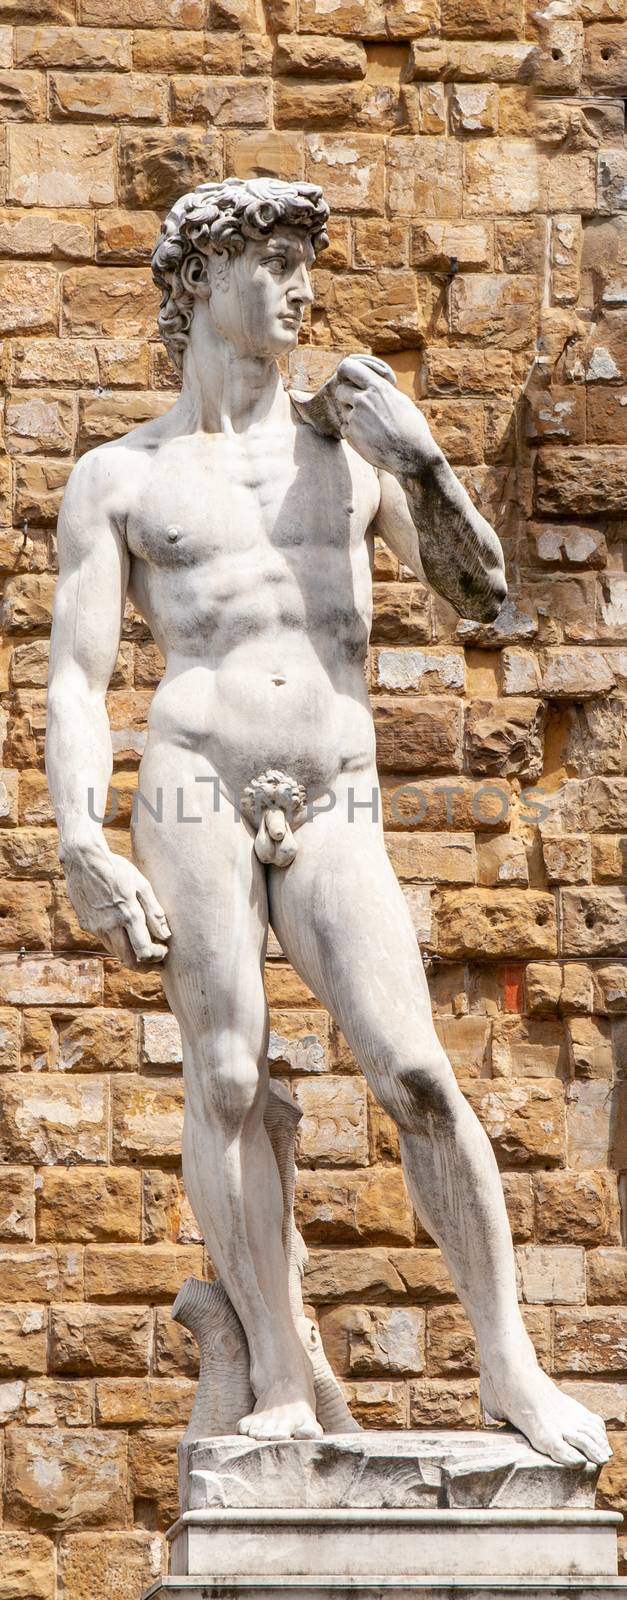 Marble statue of David created by the Italian artist Michelangelo. Copy of original renaissance scuplture in Florence, Italy by pyty